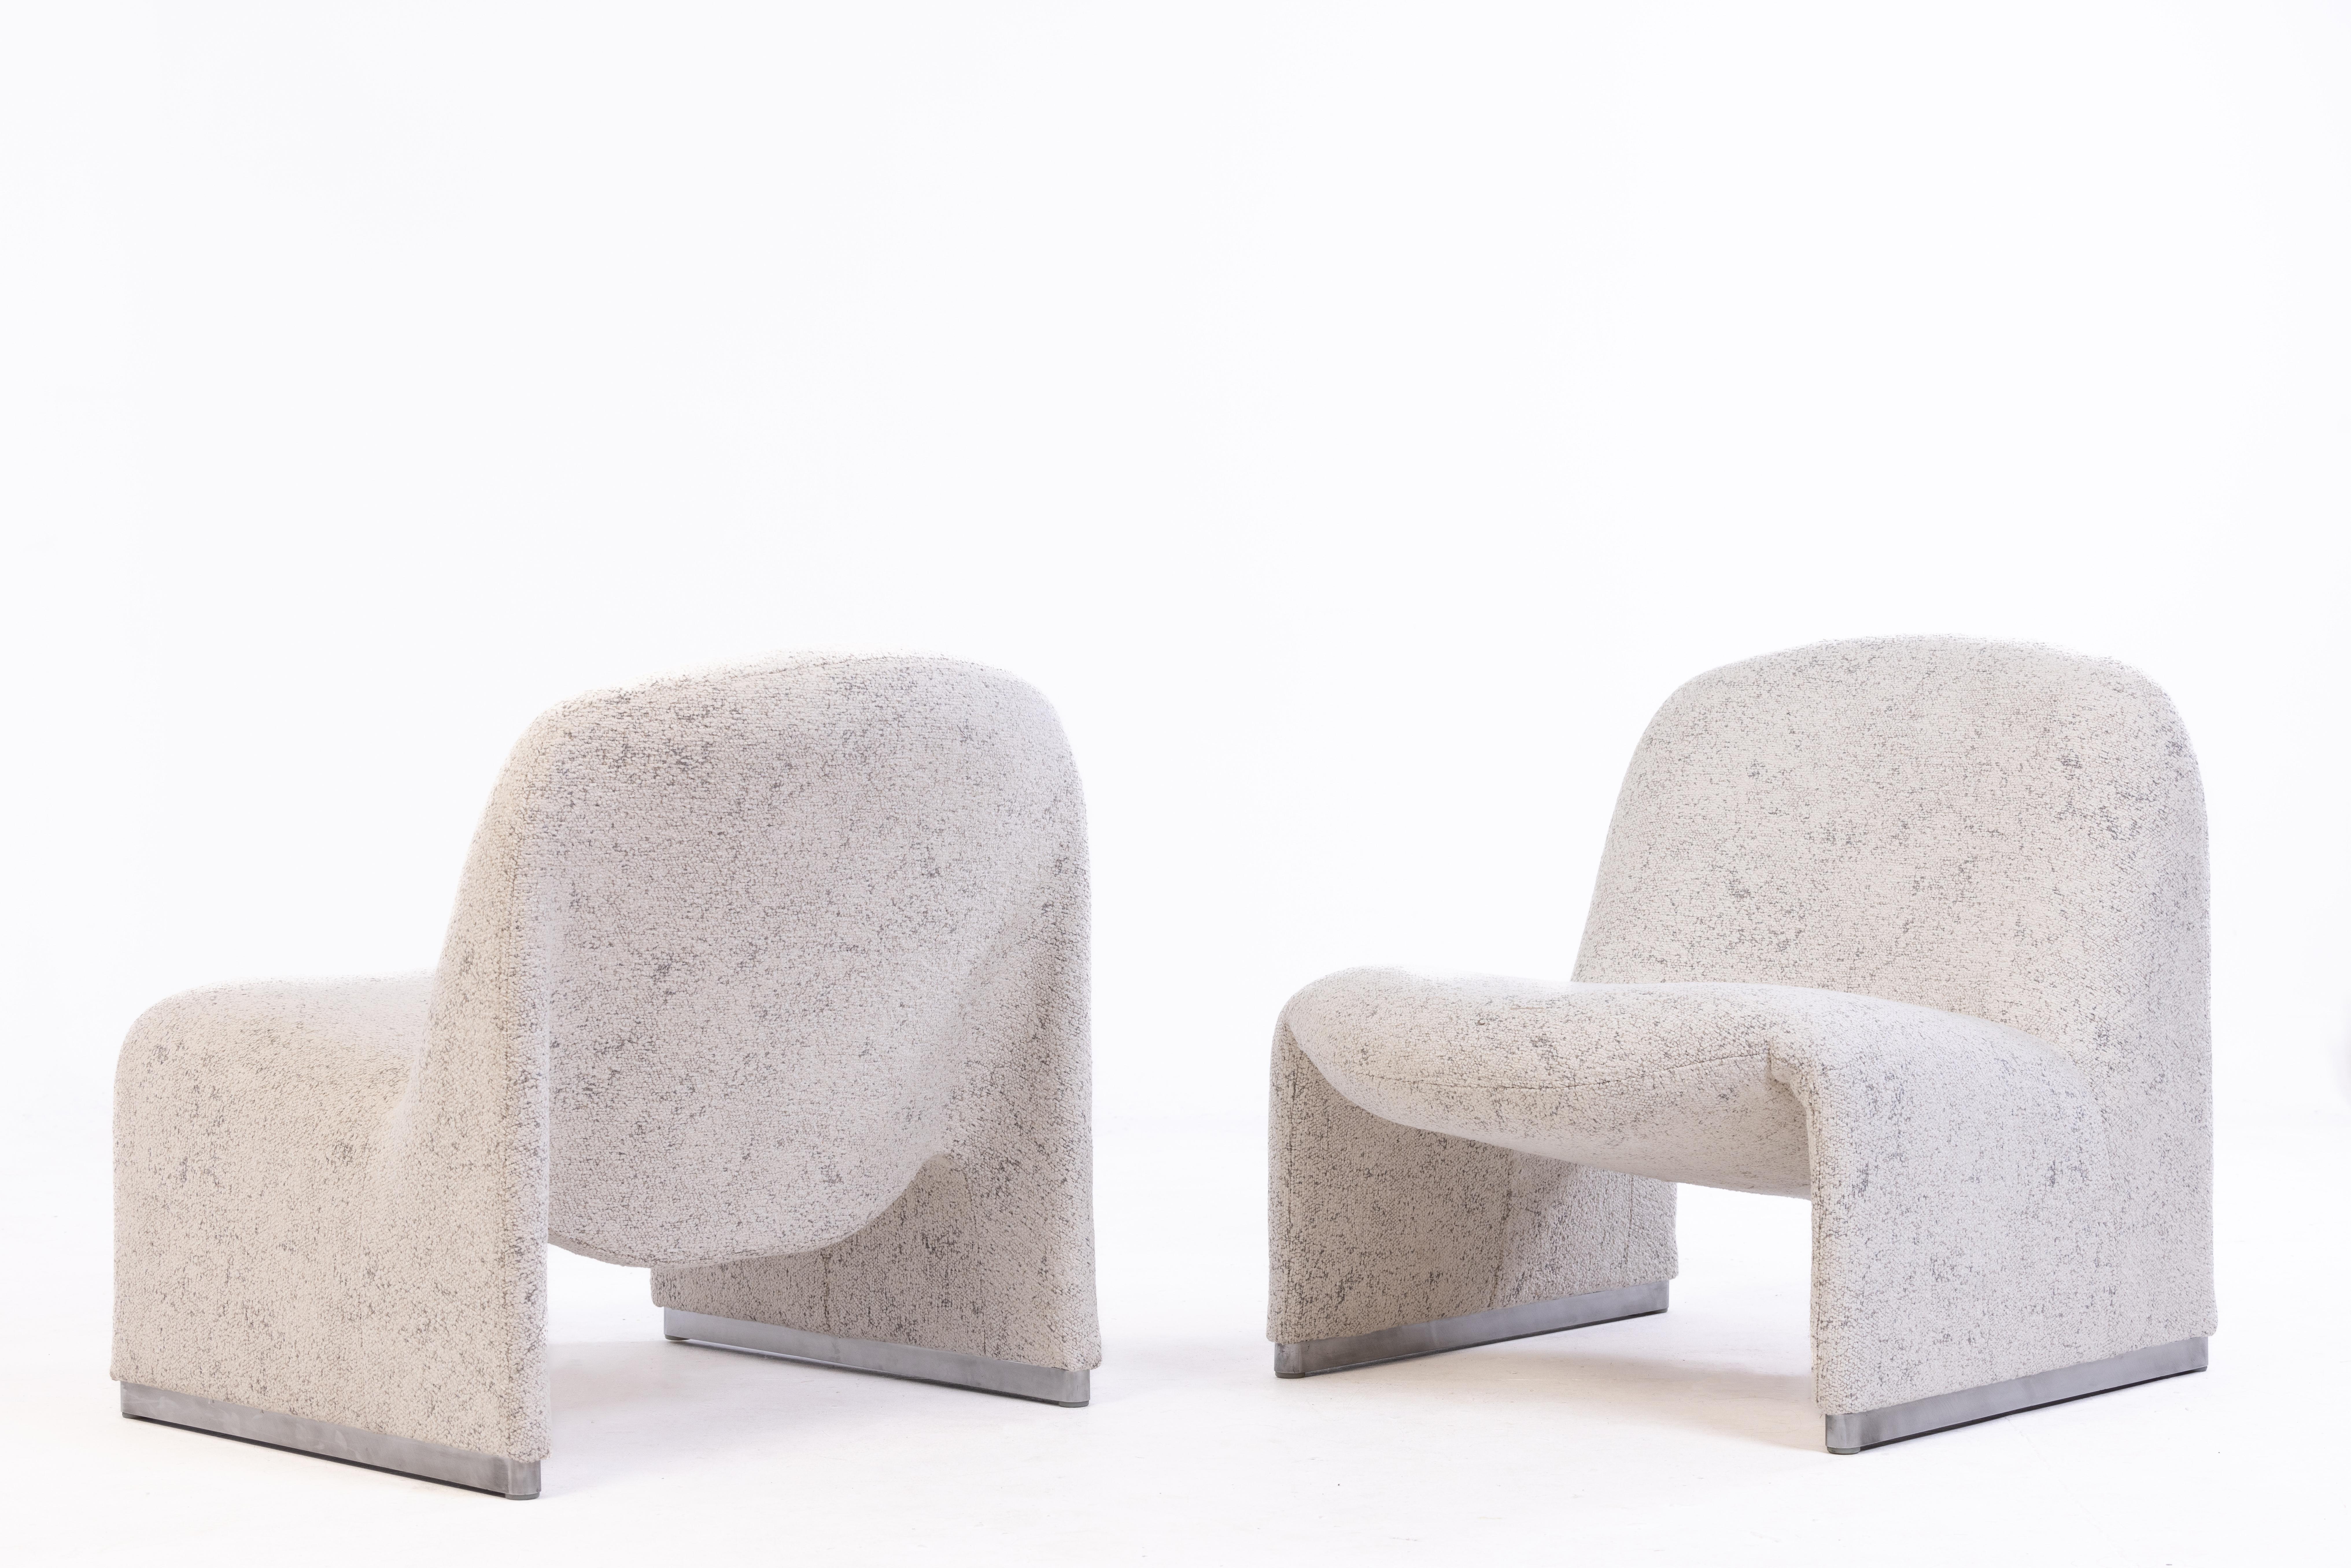 Pair of iconic lounge chairs Alky designed by Giancarlo Piretti for Artifort, Italy 1970s, entirely restored and reupholstered in Dedar fabric (Per Inciso).